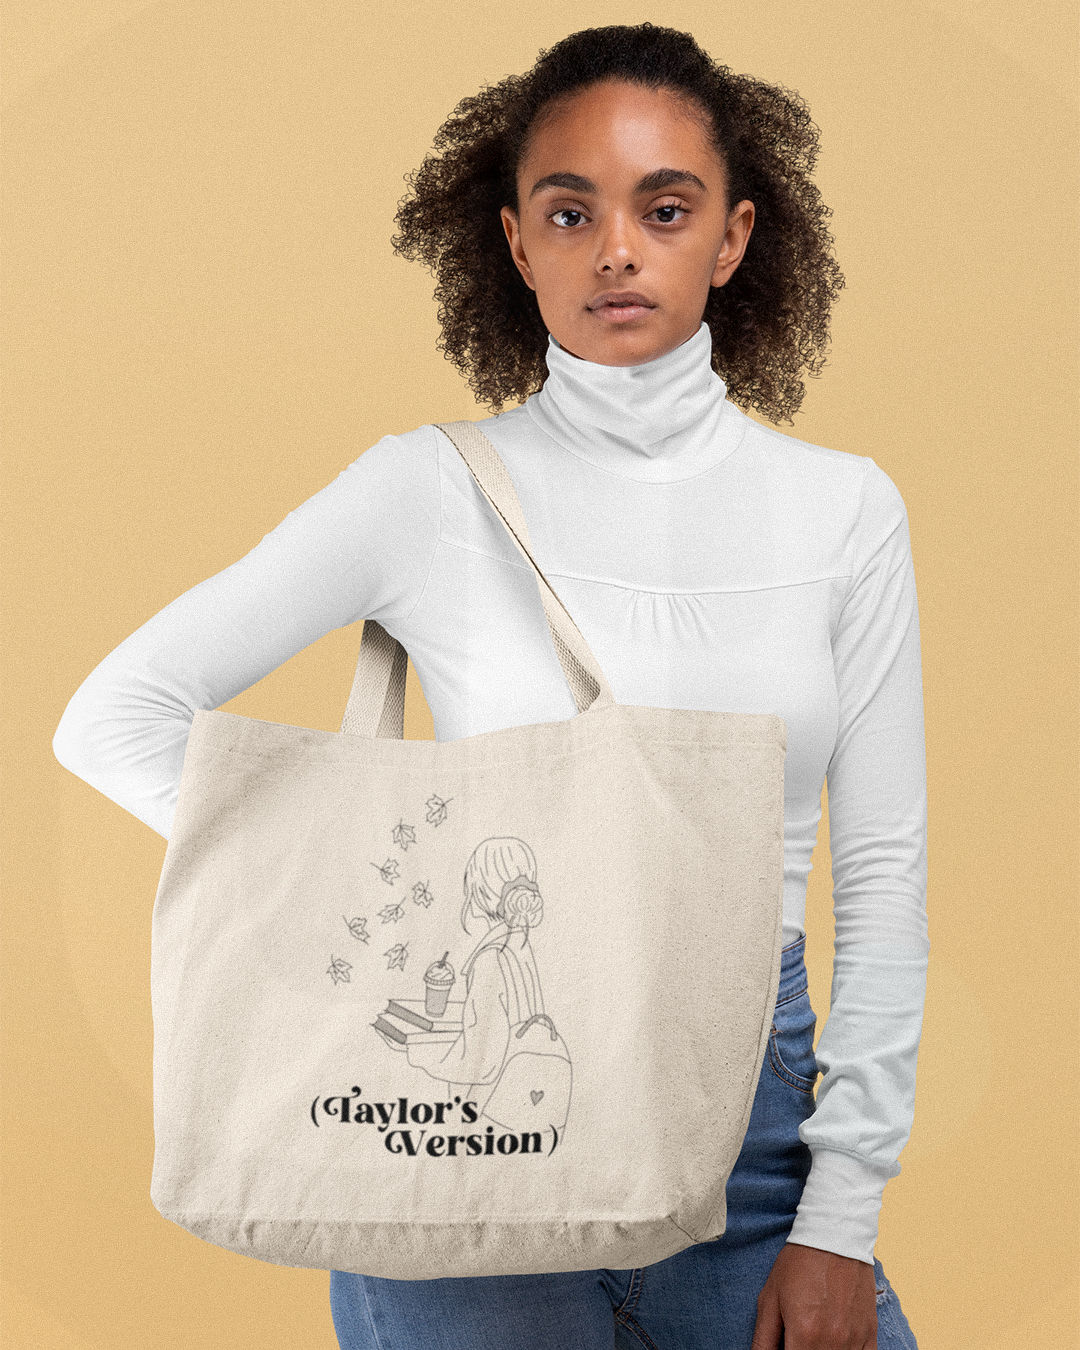 Taylor's Version Tote Bag - Autumnal Girl Taylor Swift Inspired Tote Bag - Swifties Inspired Eras Tour Shopper Tote Bag - Taylor's Version Autumnal Girl Taylor Swift Inspired Tote Bag